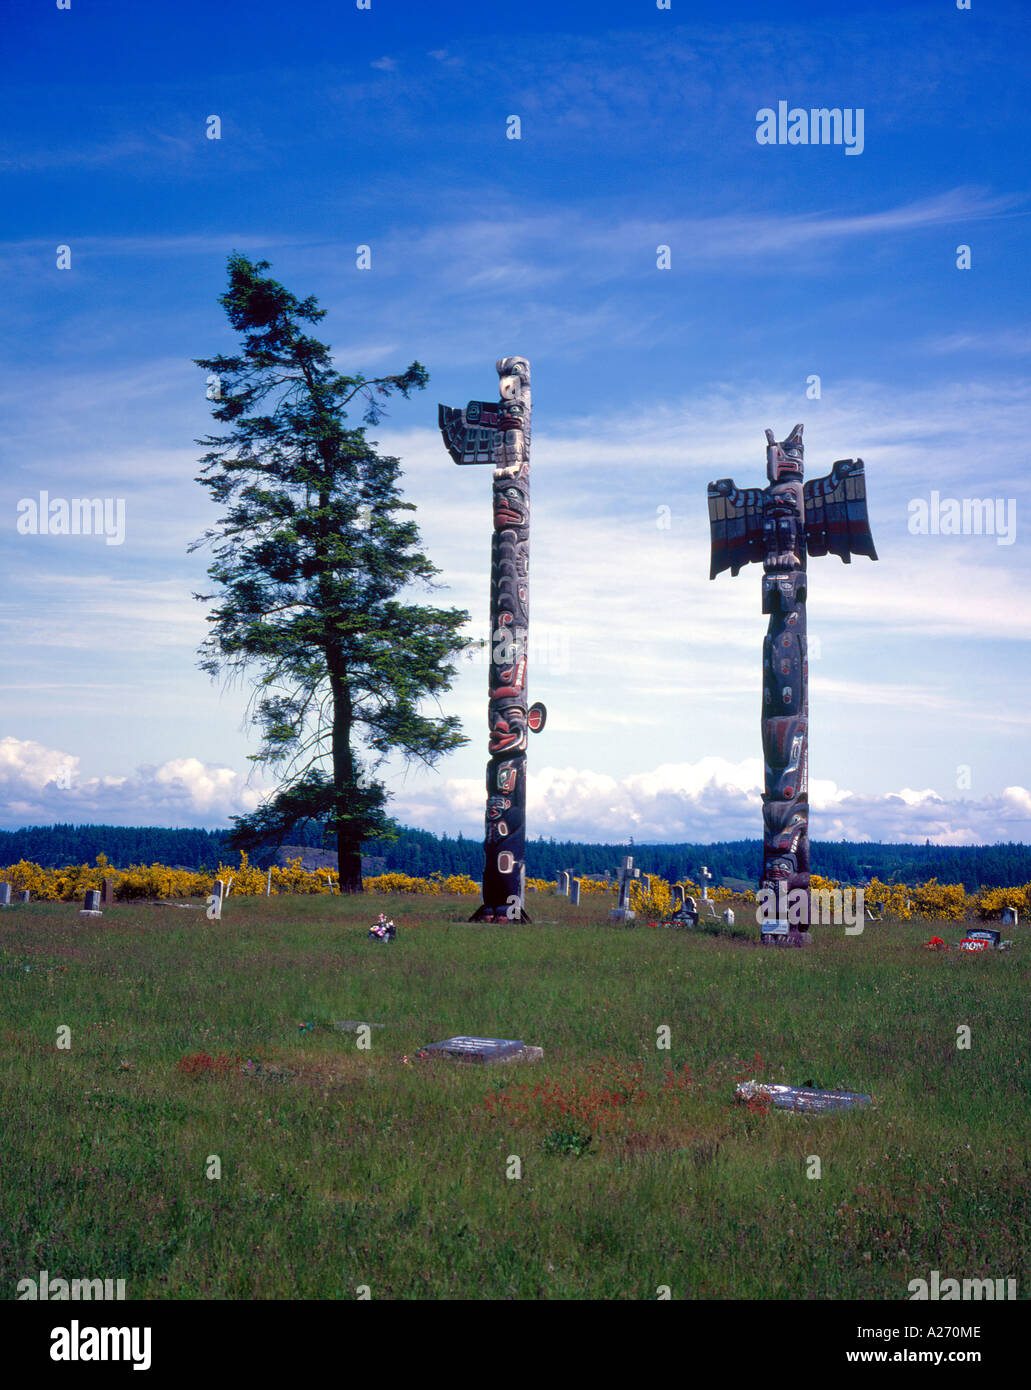 totem poles at Campell River, BC, Canada. Photo by Willy Matheisl Stock Photo